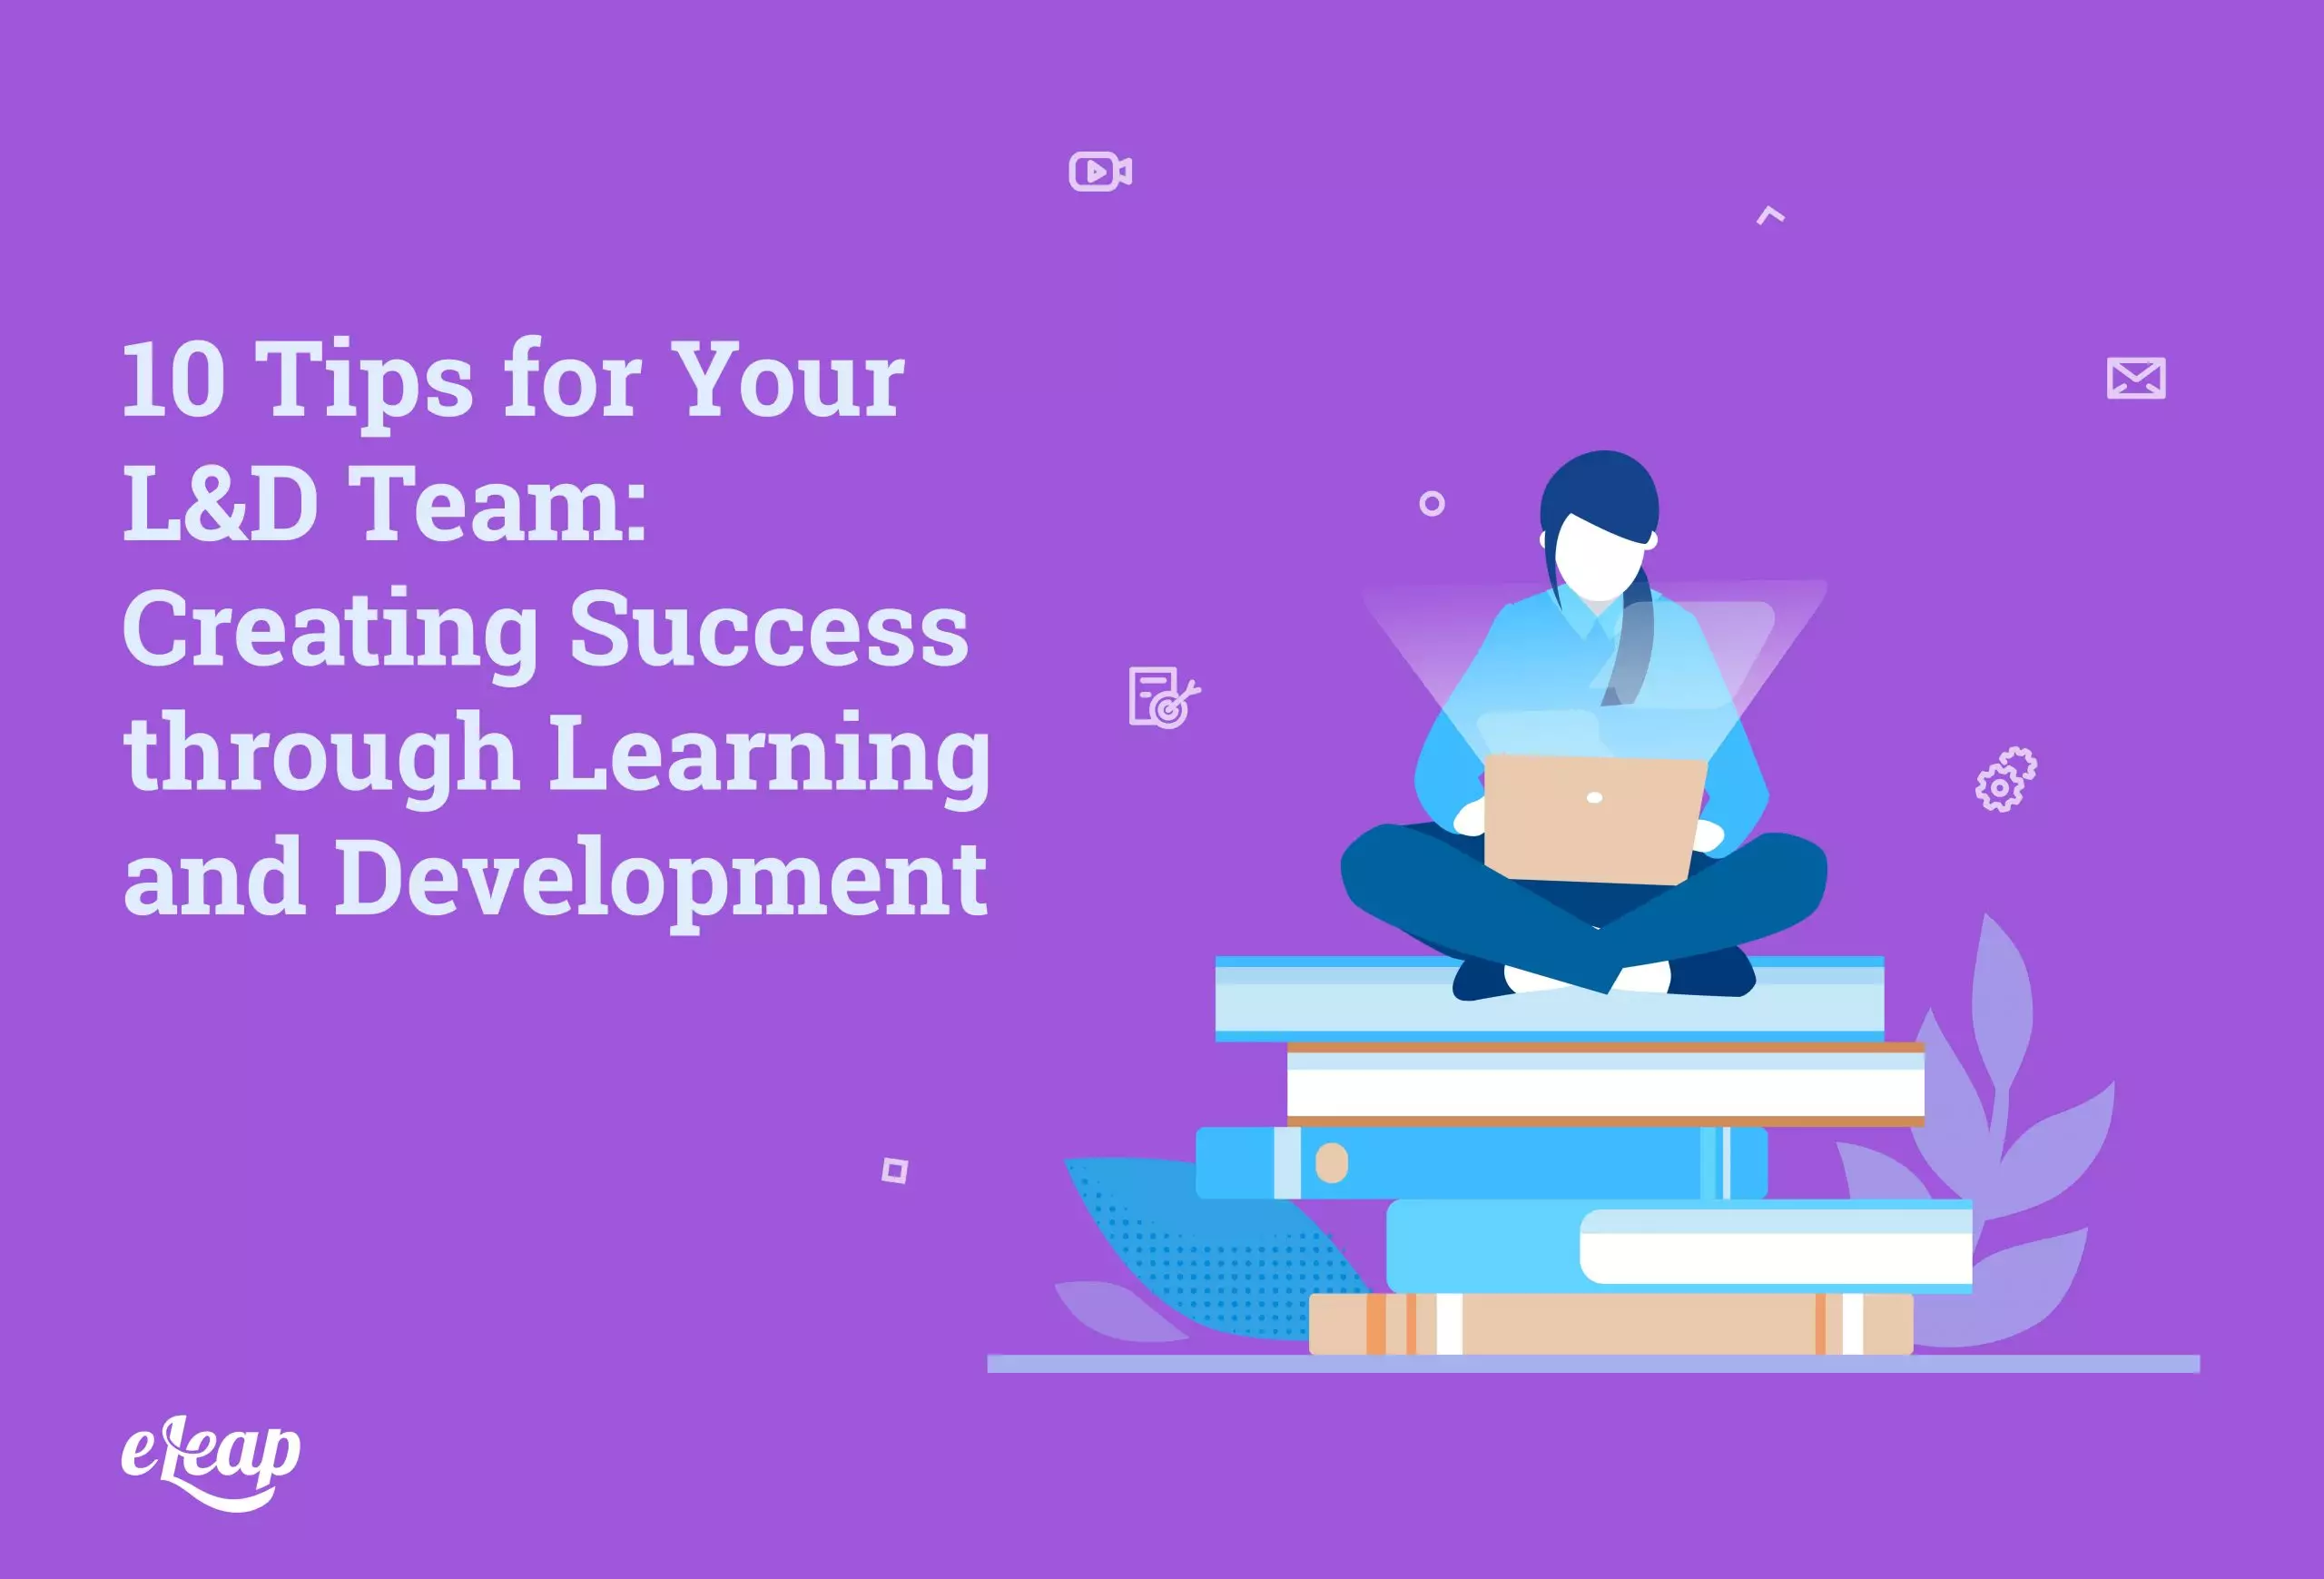 10 Tips for Your L&D Team: Creating Success through Learning and Development